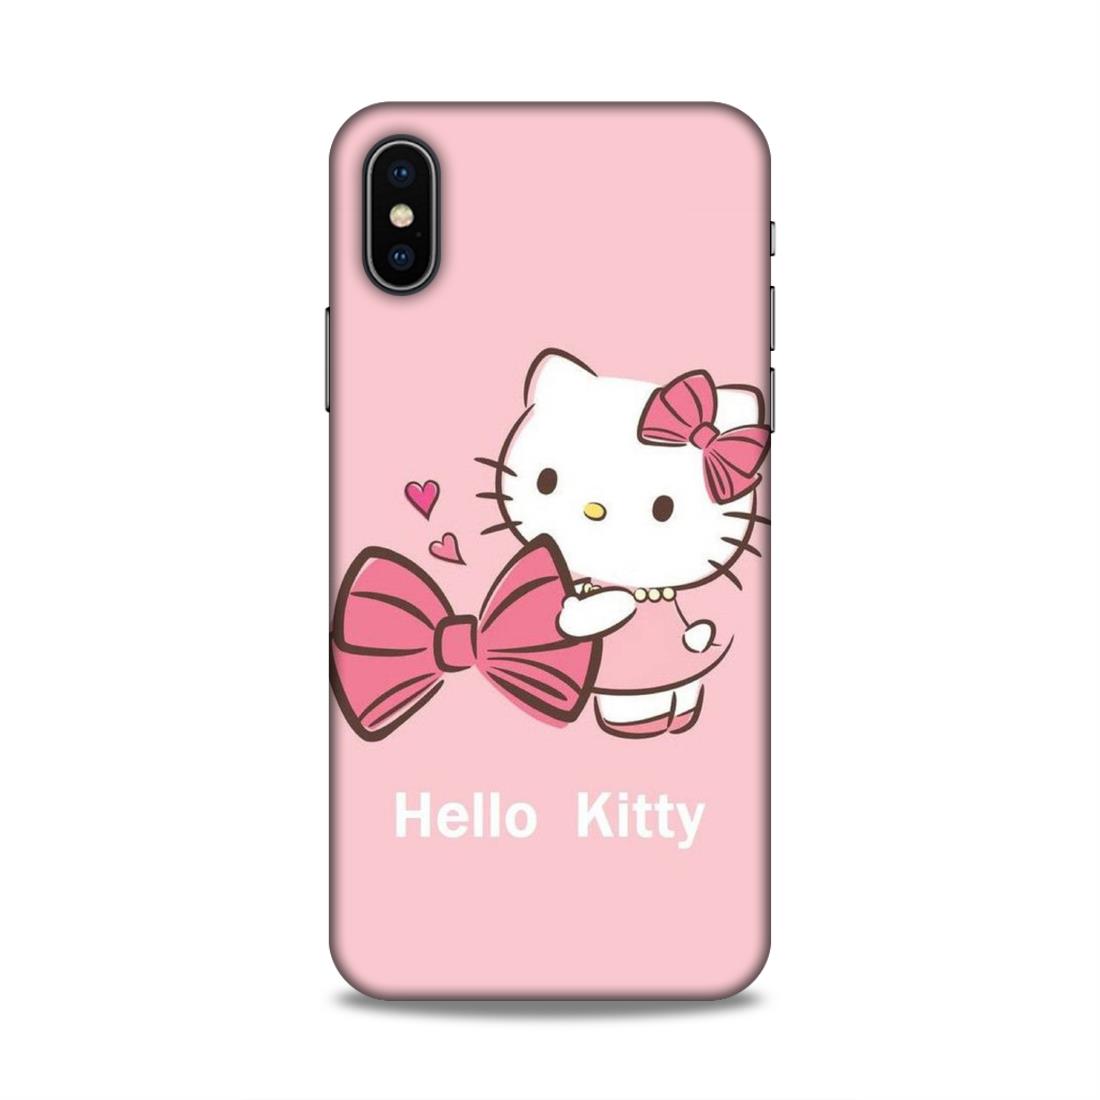 Hello Kitty Hard Back Case For Apple iPhone X/XS